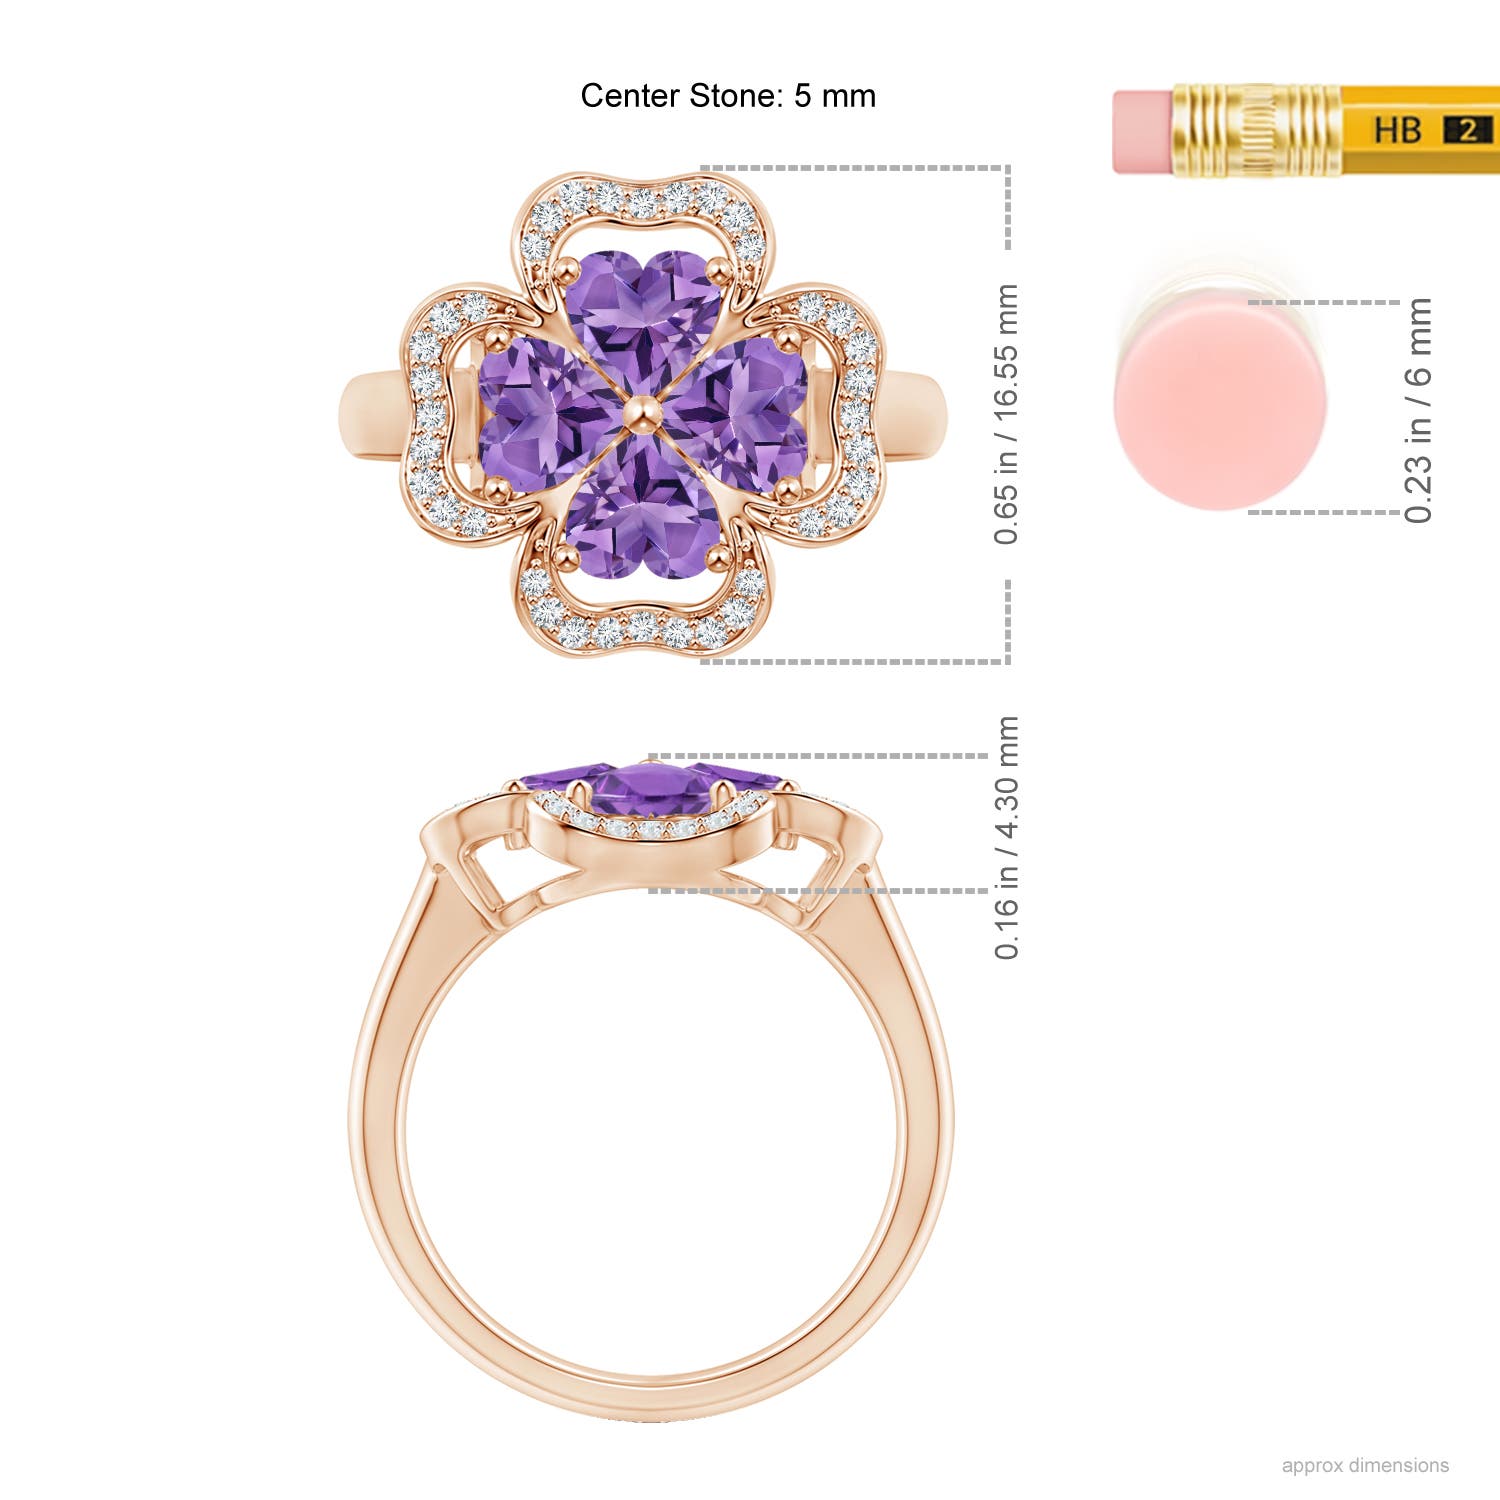 AA - Amethyst / 1.57 CT / 14 KT Rose Gold